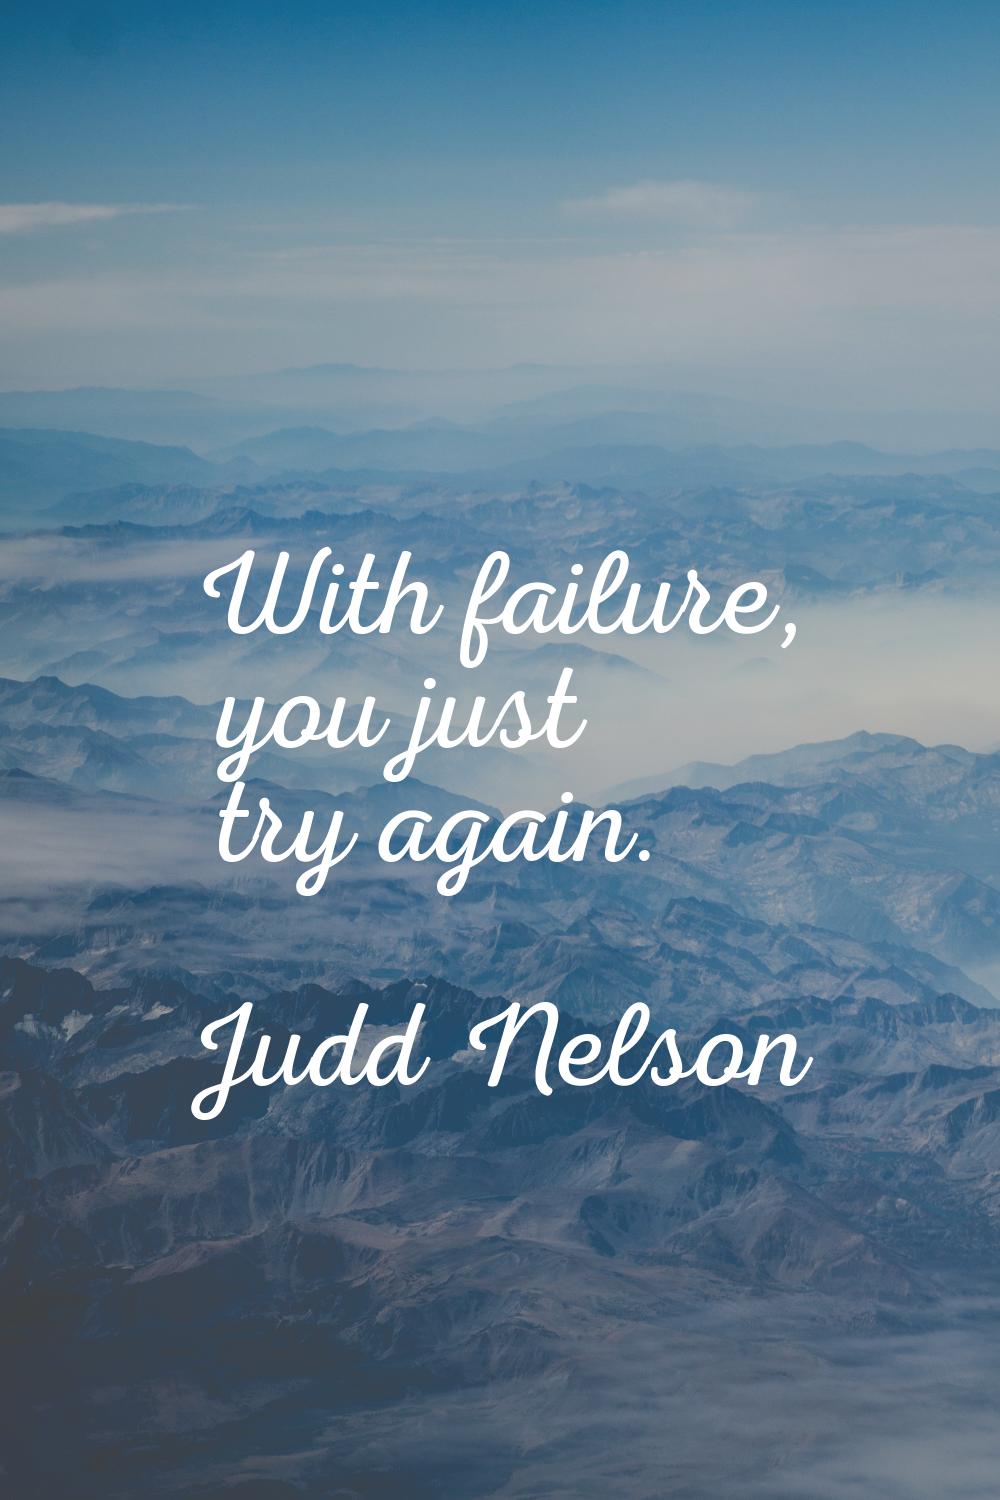 With failure, you just try again.